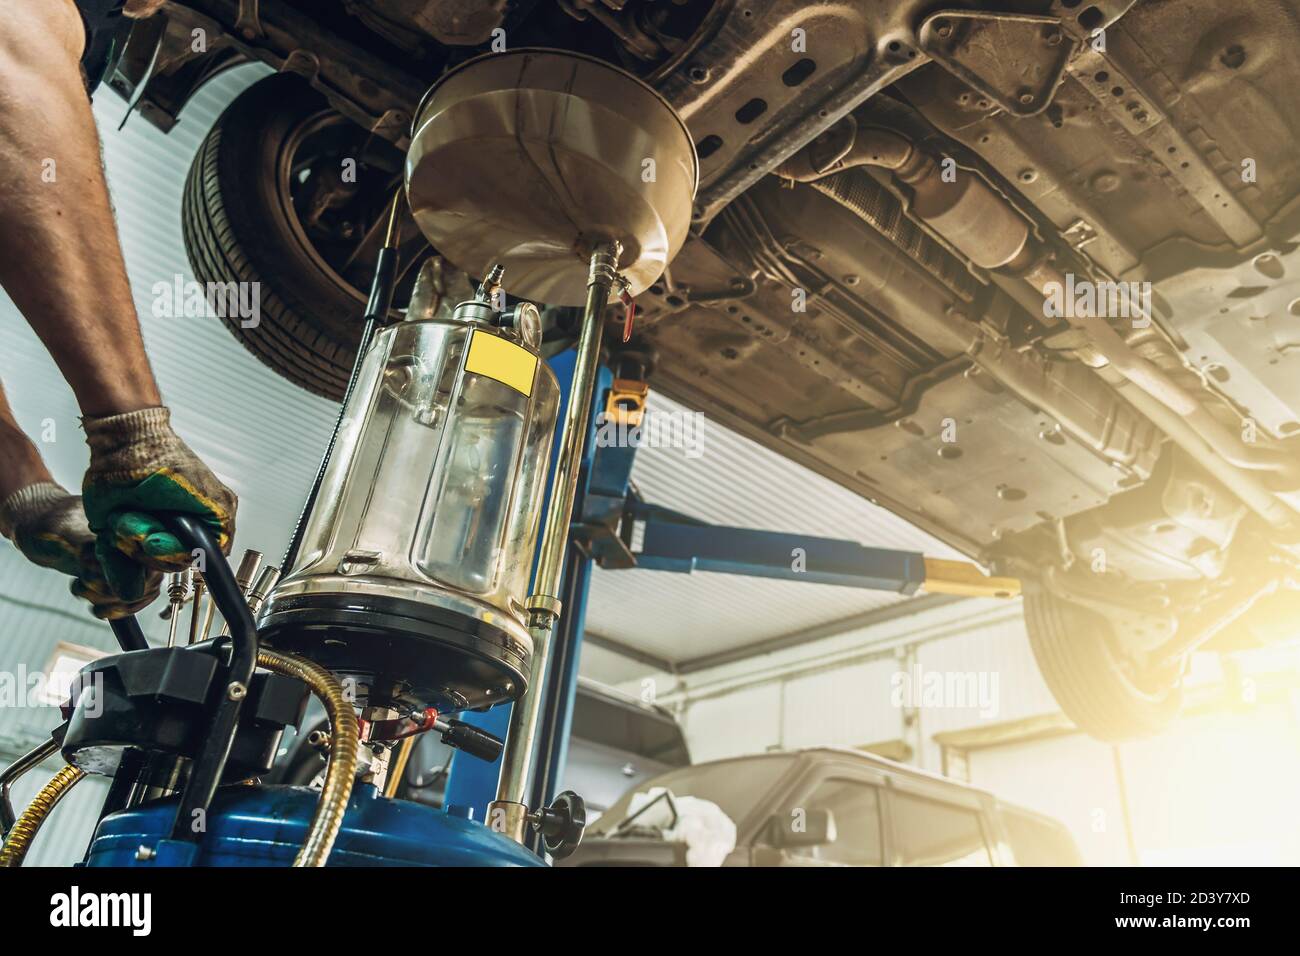 Changing Gear Oil or Engine or Motor OIL in Car Service with auto on lift, maintenance concept. Stock Photo